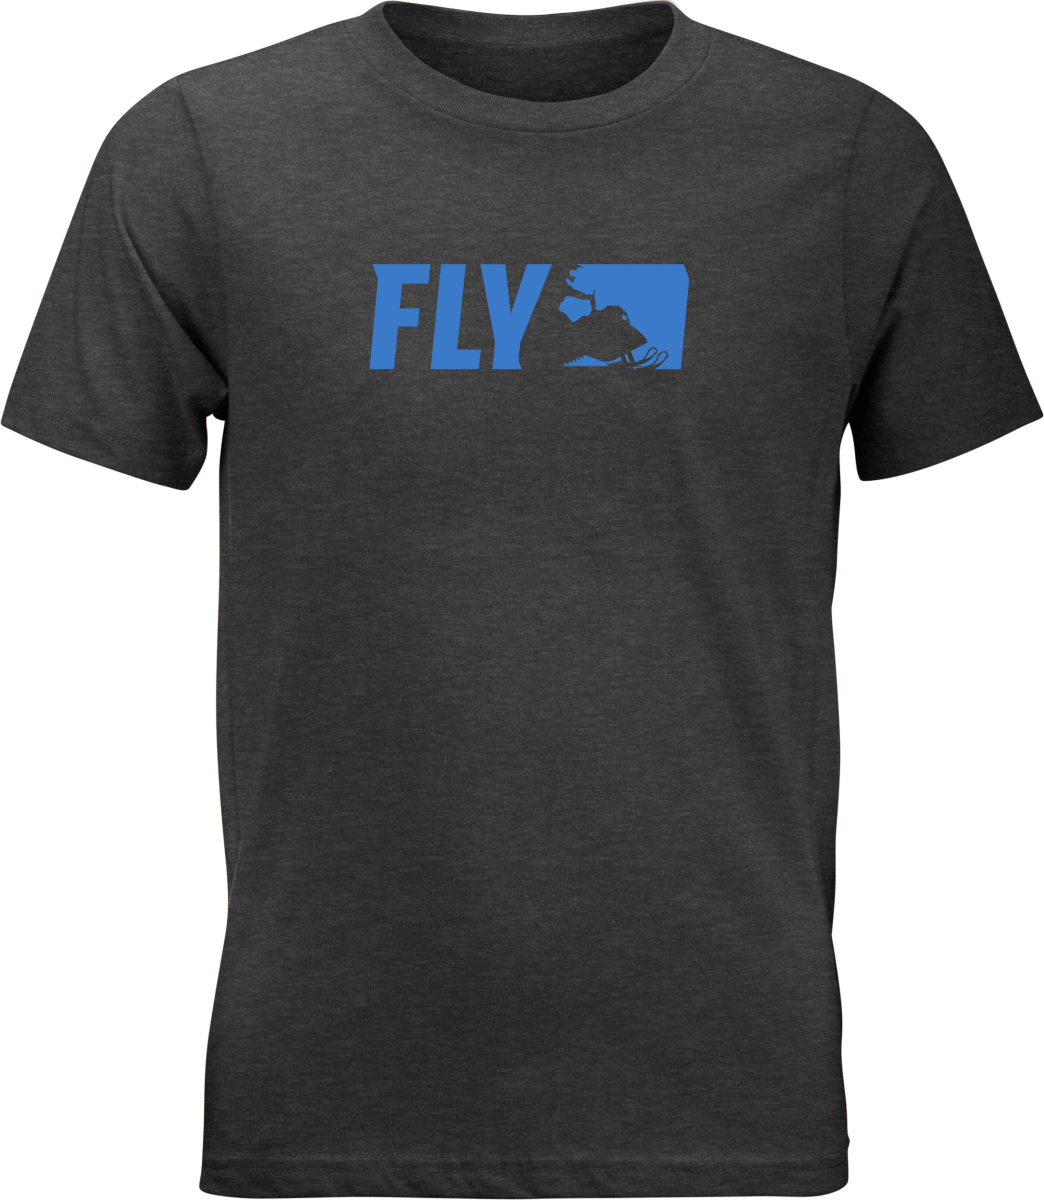 FLY RACING - YOUTH PRIMARY TEE - 352-0526YL - 191361322976